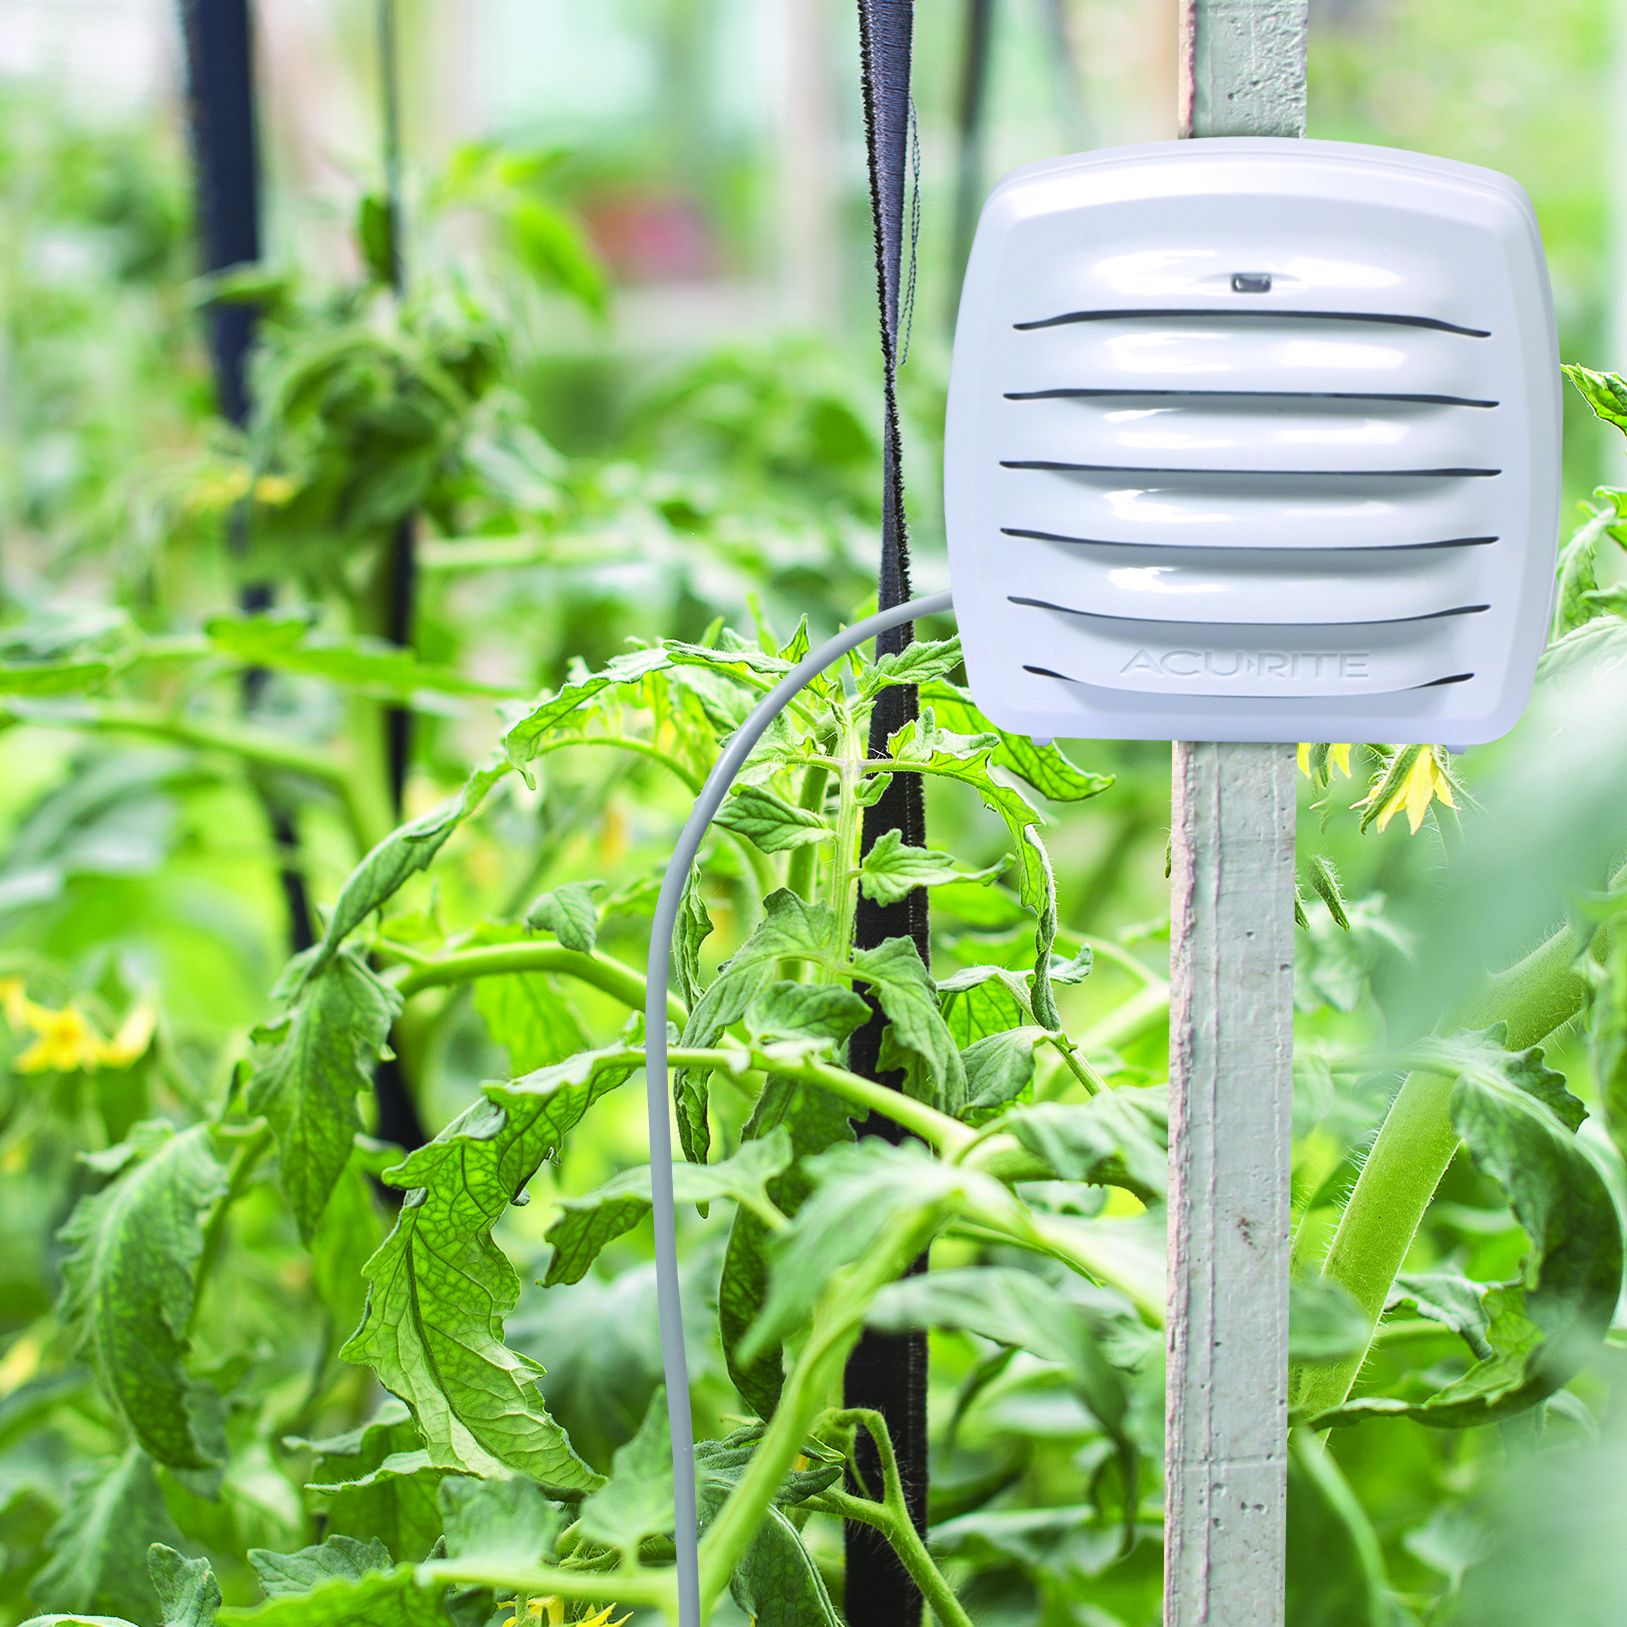 Outdoor Monitor with Liquid & Soil Temperature Sensor mounted on a wooden stake in flowerbed